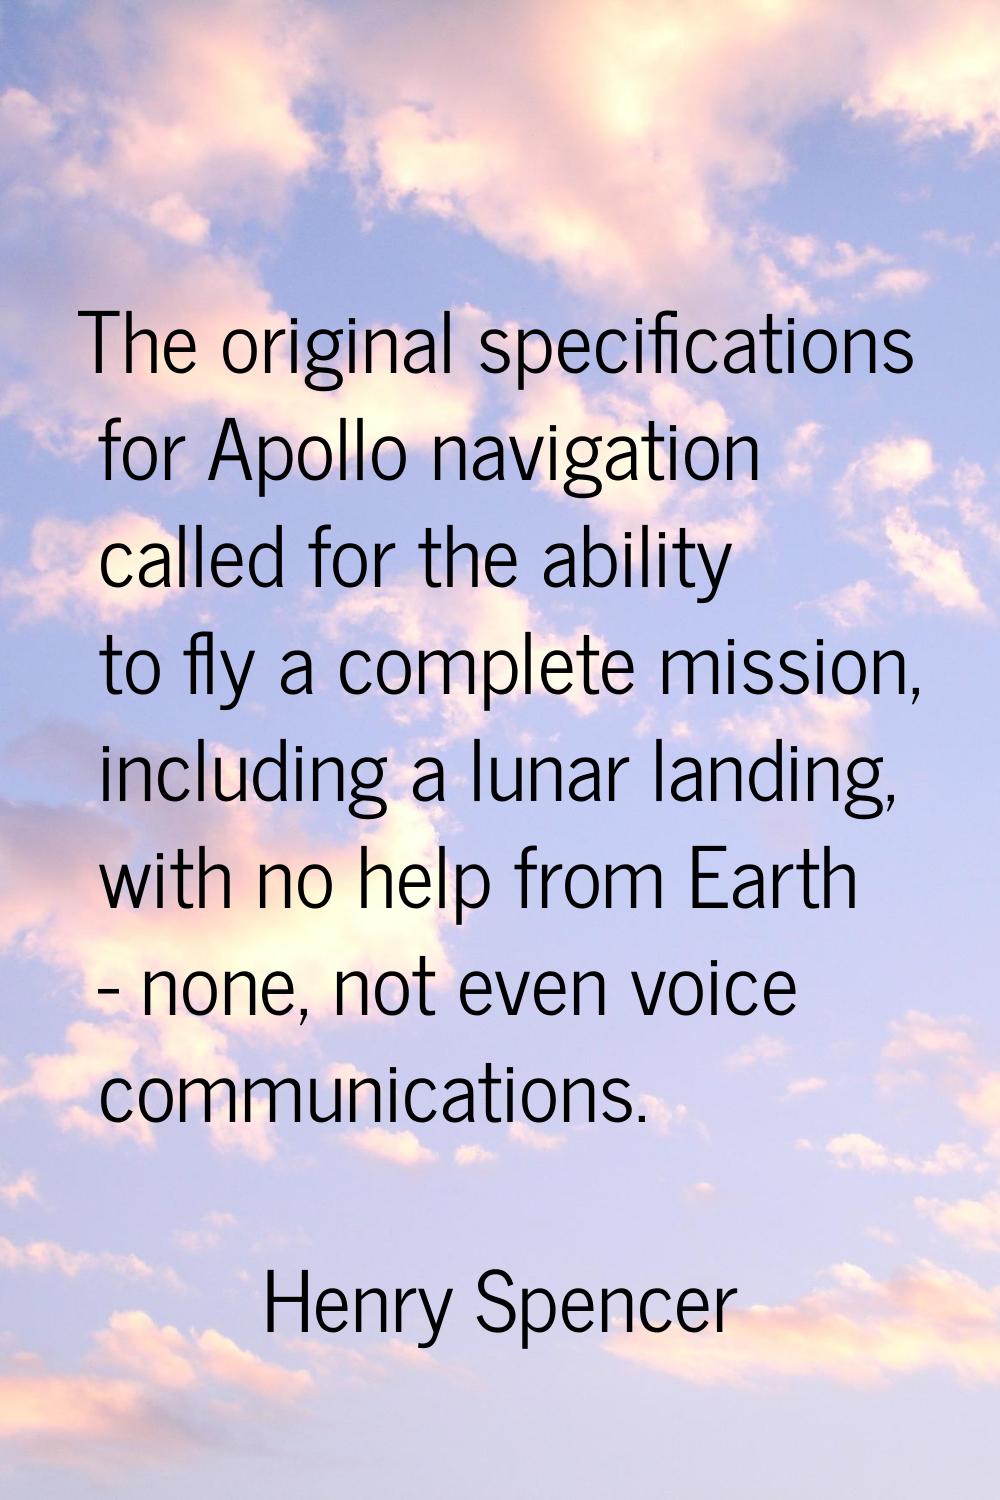 The original specifications for Apollo navigation called for the ability to fly a complete mission,